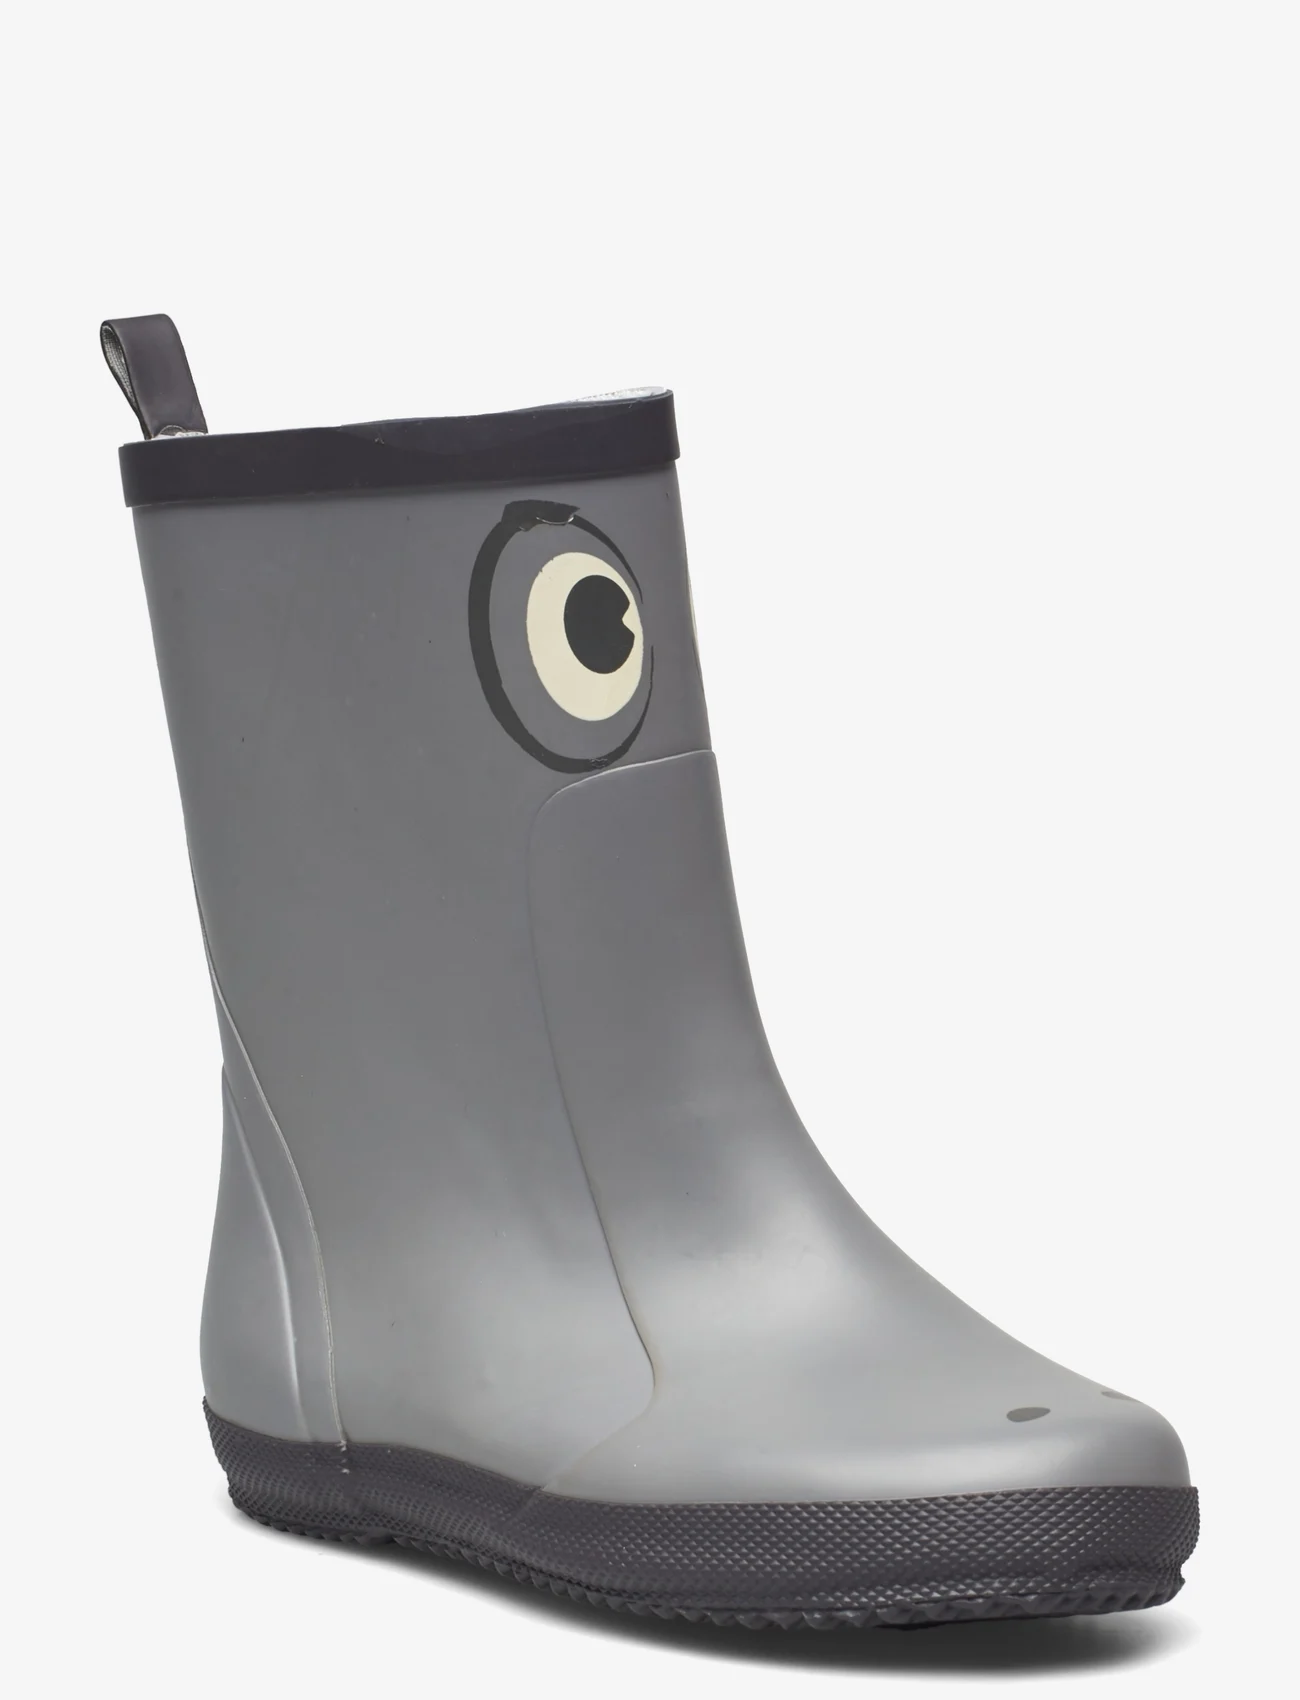 CeLaVi - Wellies - Front Print - unlined rubberboots - frost gray - 0